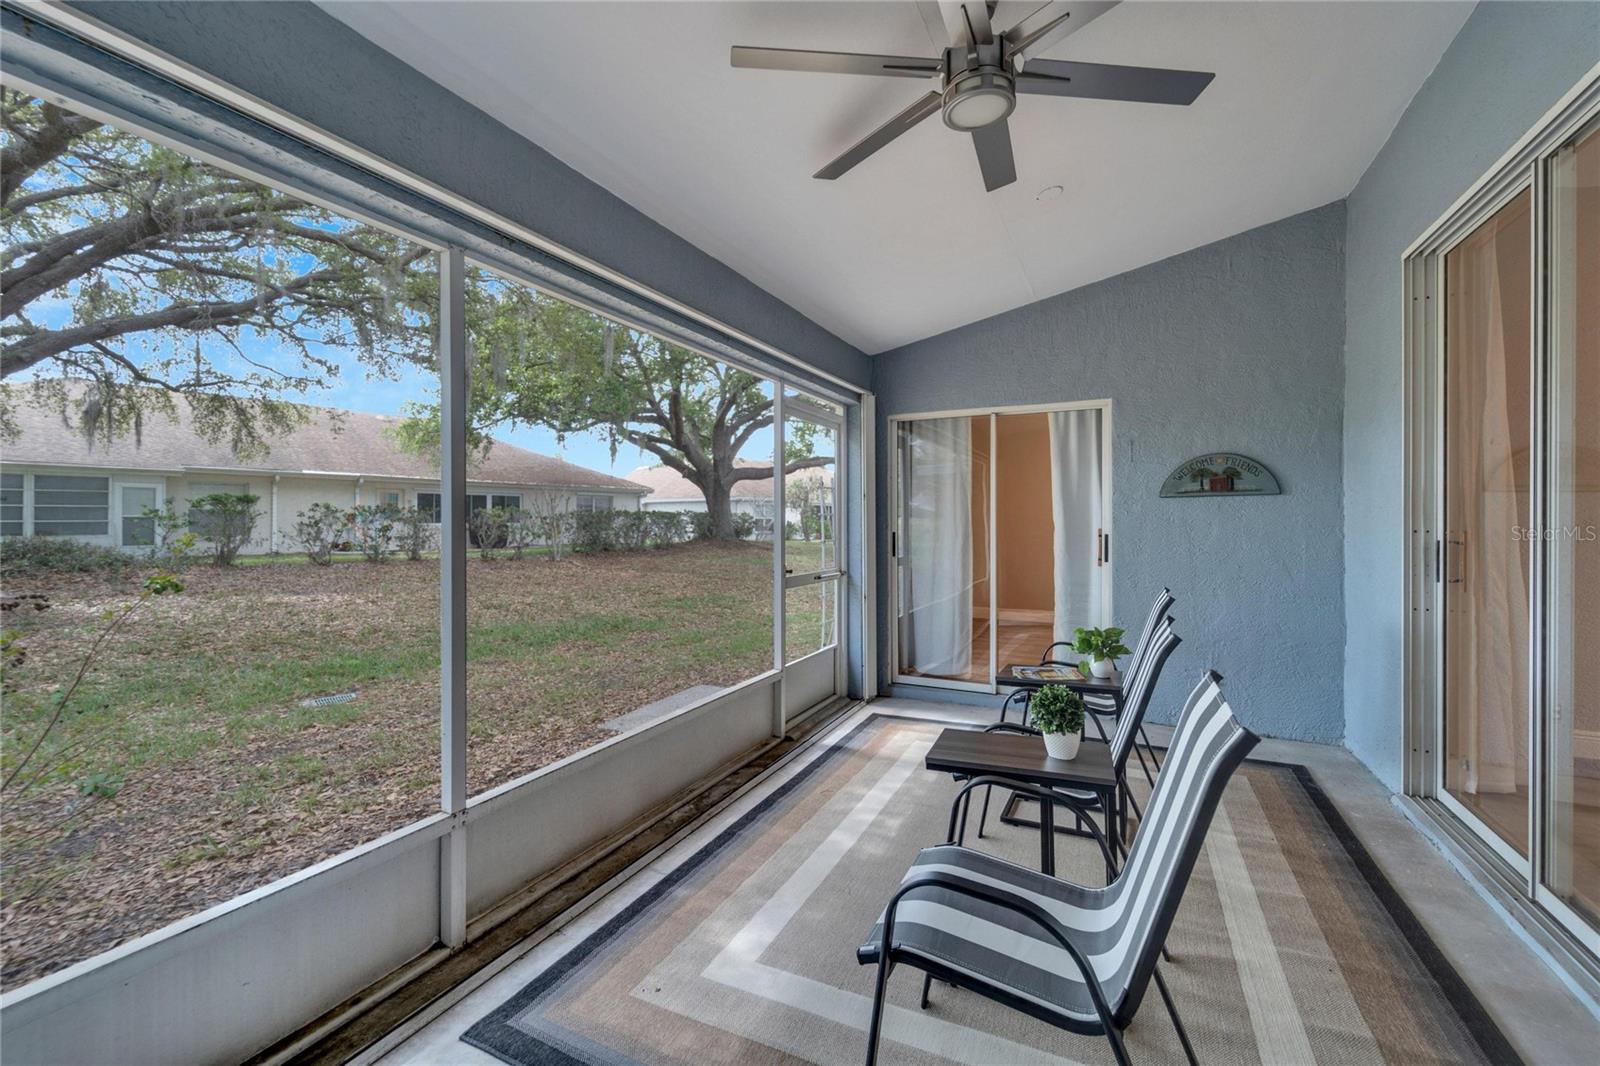 Spacious Lanai with ceiling fan and access to Bedroom #2 and the Living Room